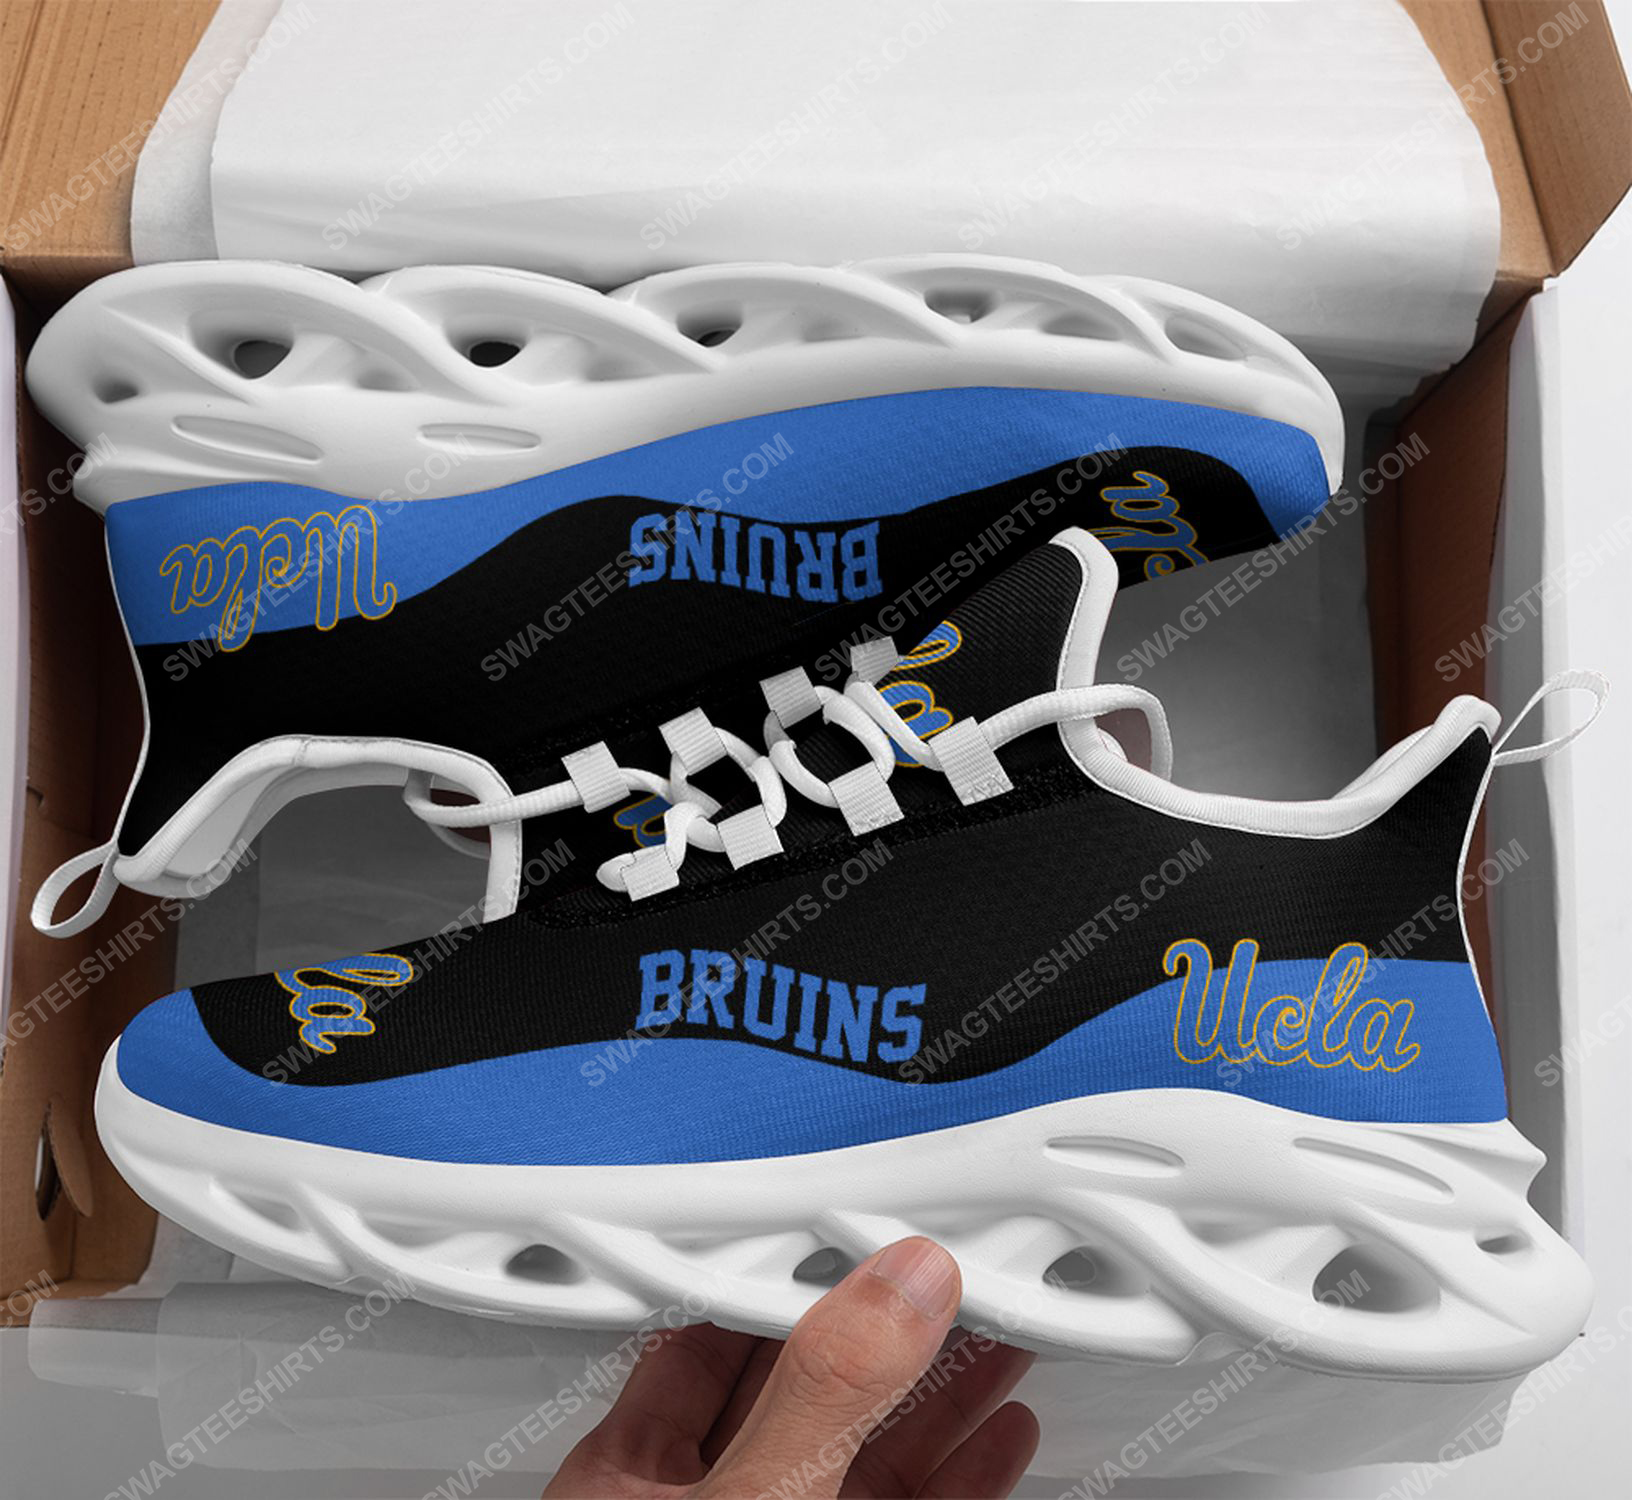 The ucla bruins football team max soul shoes 1